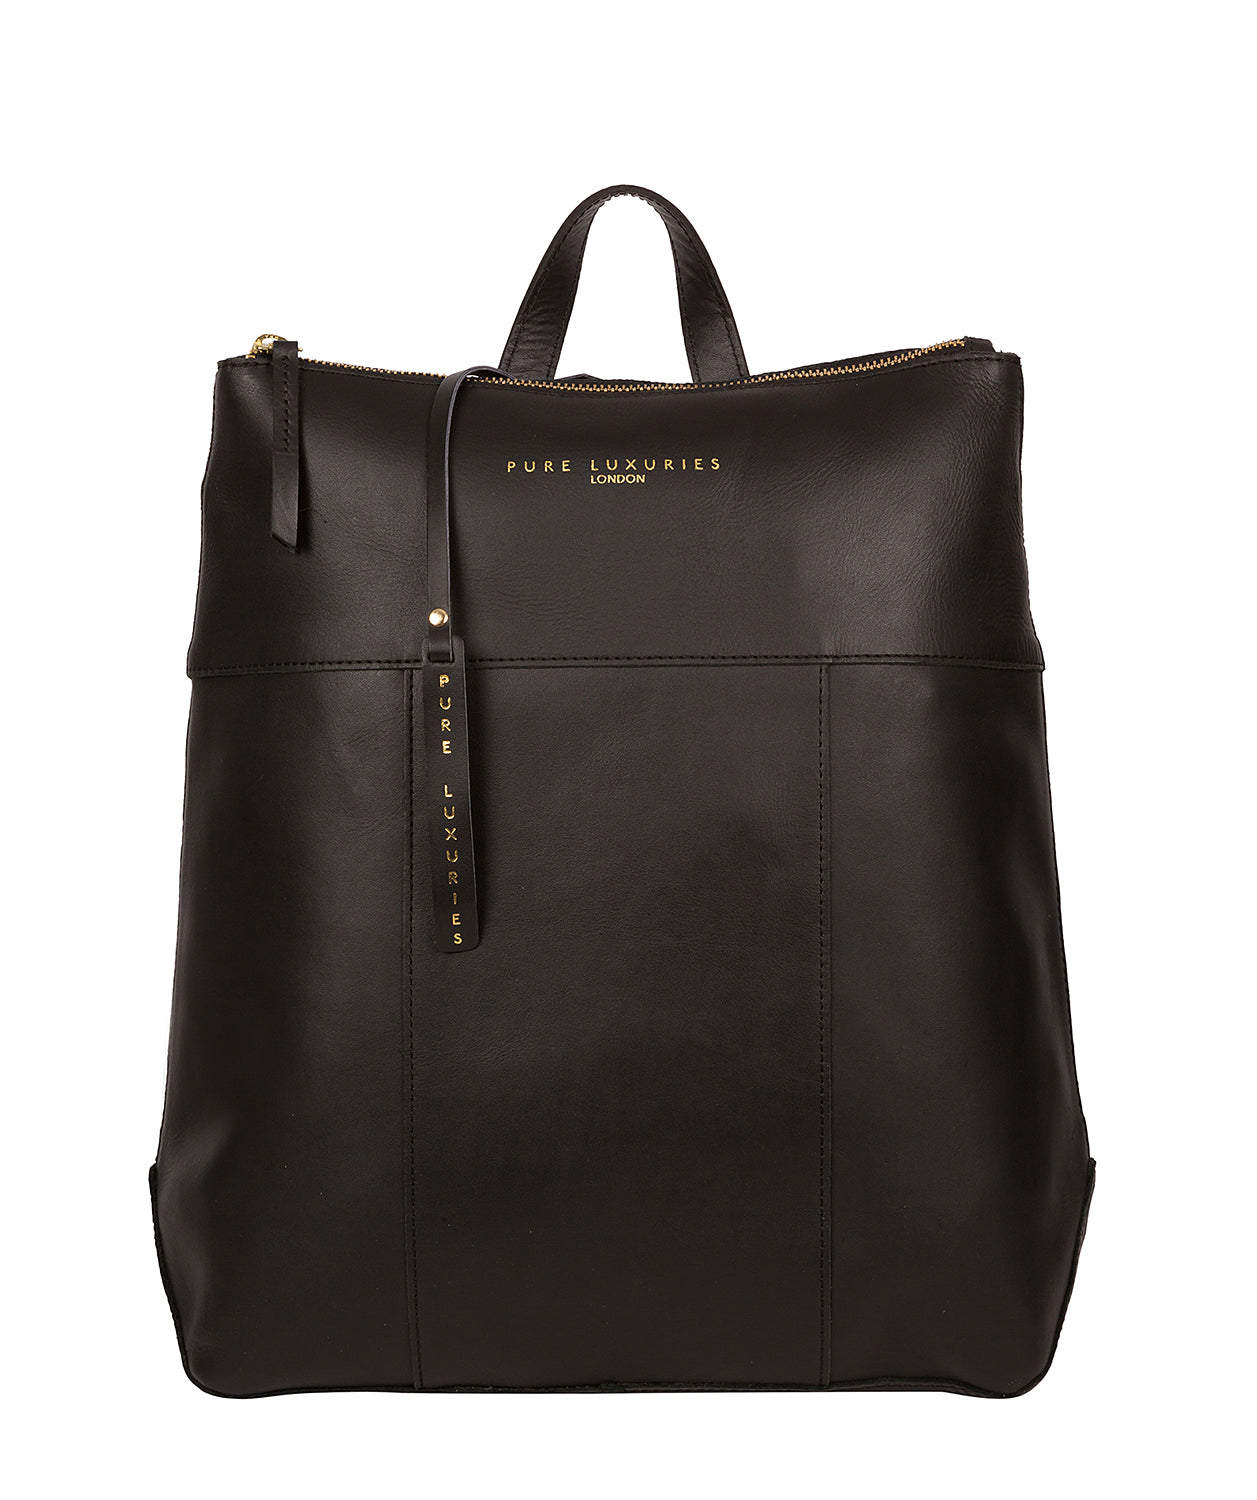 Black Leather Backpack 'Hastings' by Pure Luxuries – Pure Luxuries London